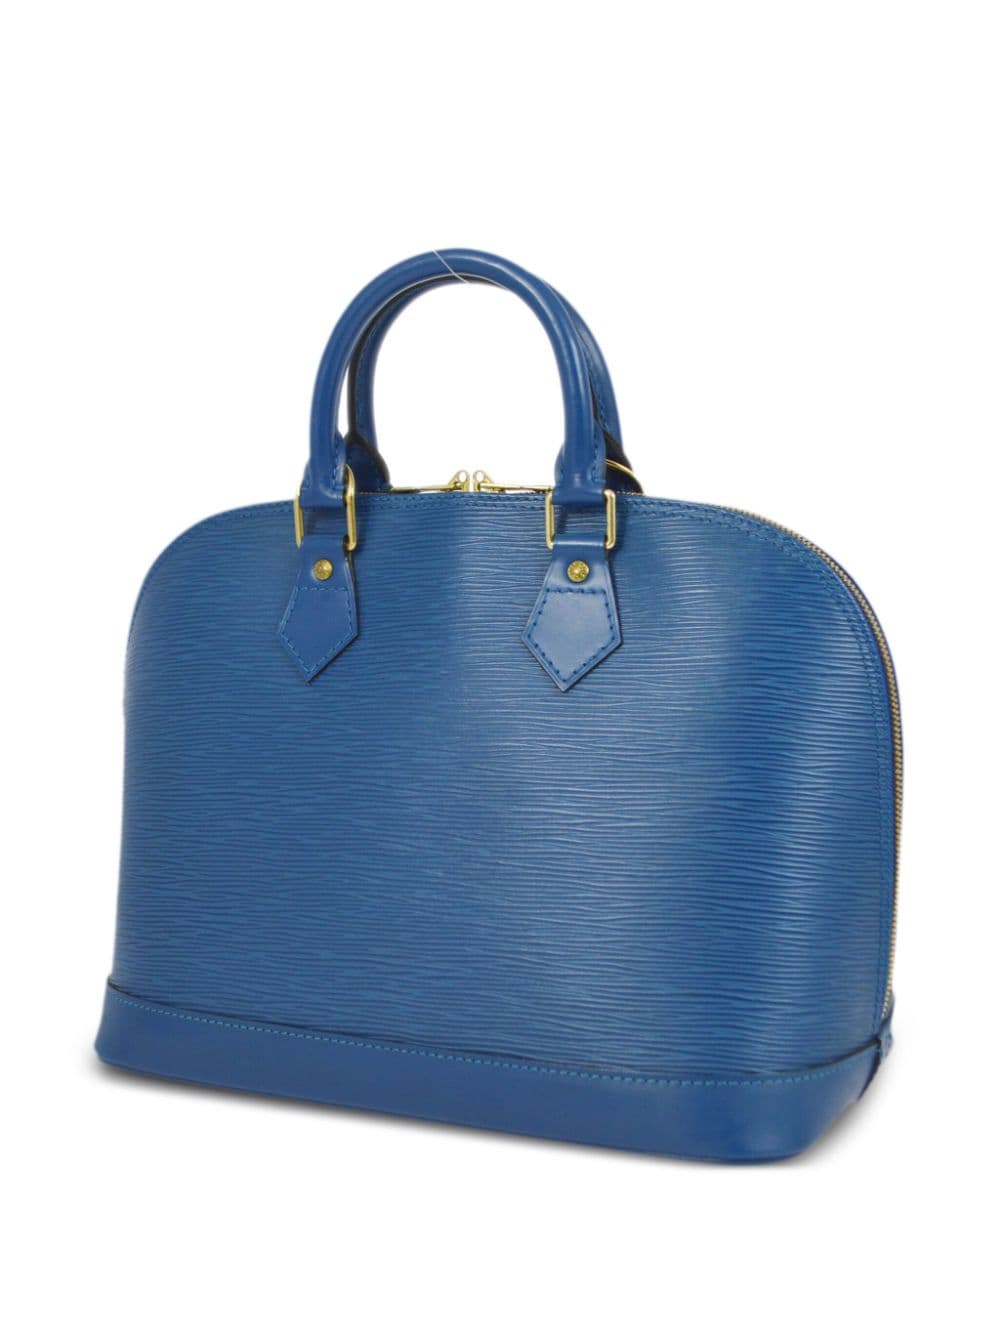 Pre-owned Louis Vuitton 1997  Alma Pm Tote Bag In Blue